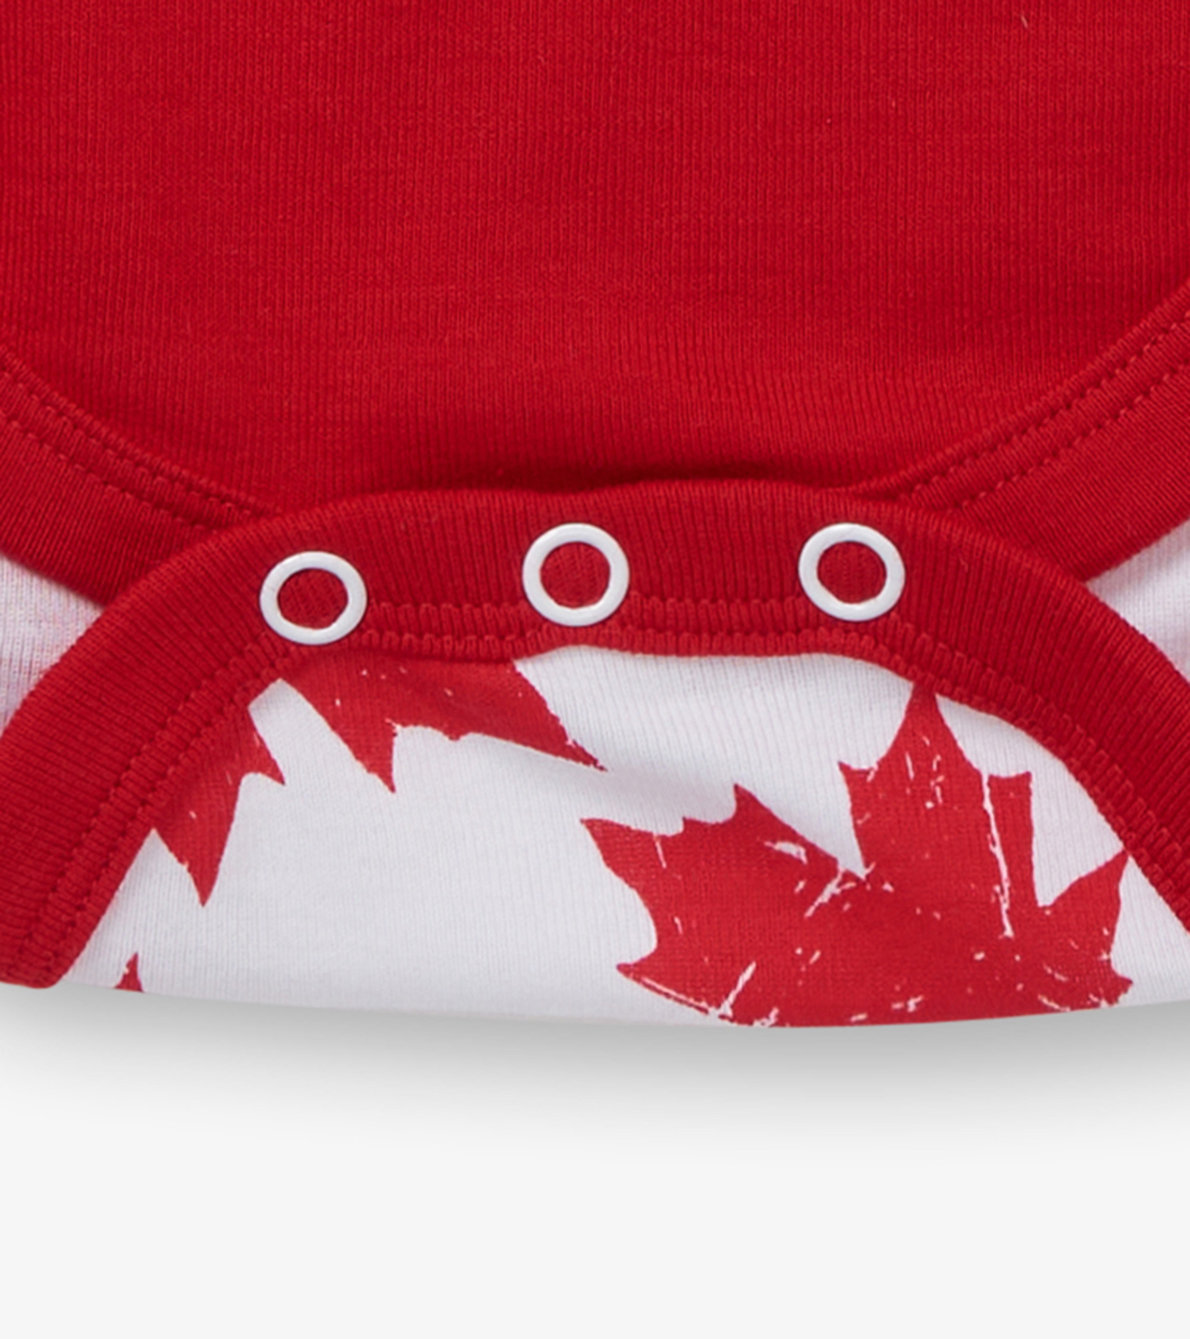 View larger image of Canada Baby Bodysuit & Hat